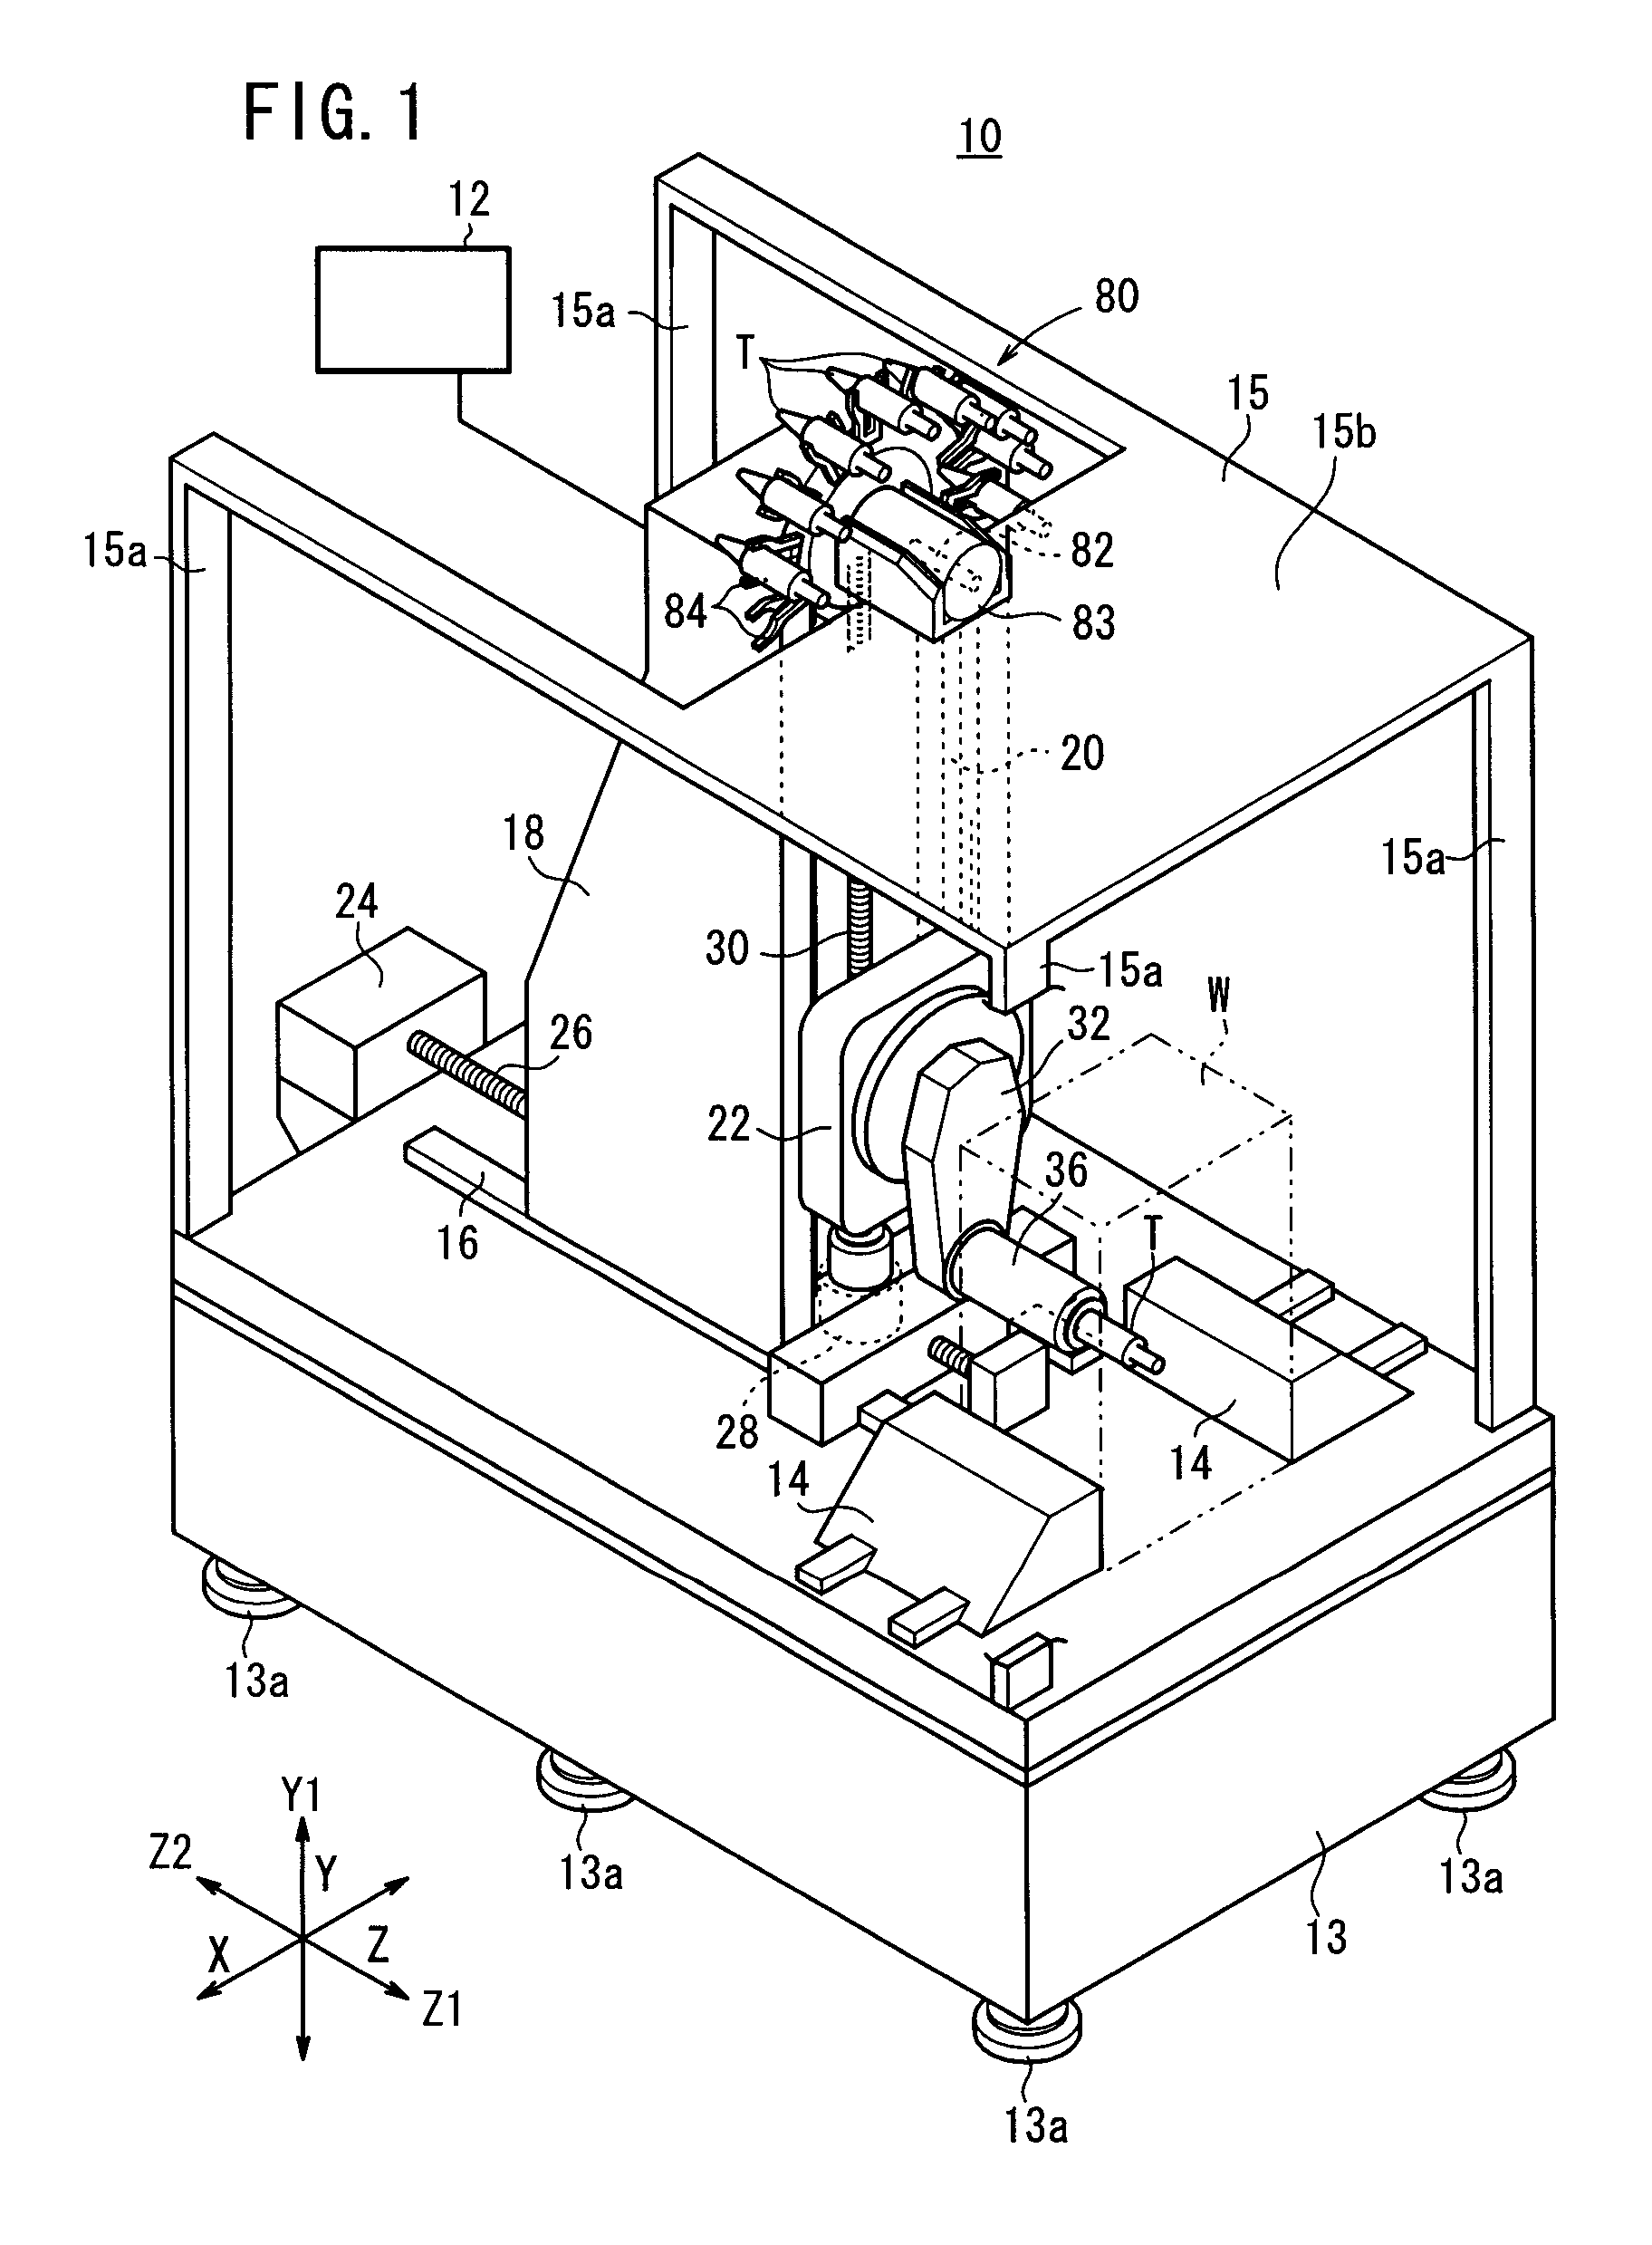 Machine tool including a Z-table and processing spindle rotatably supported on a rotation arm